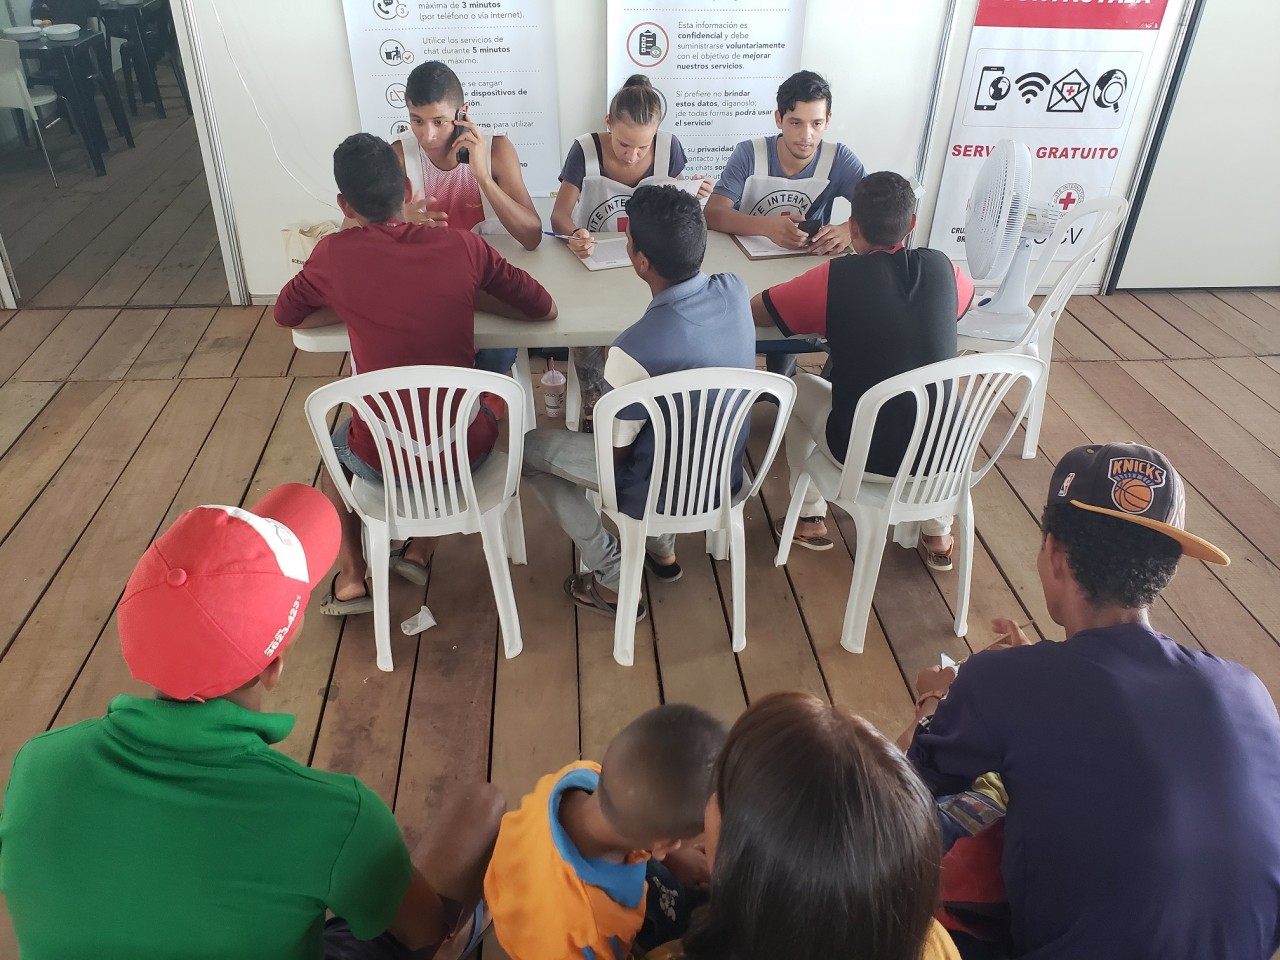 Brazil: A voice of encouragement from afar | International Committee of the  Red Cross